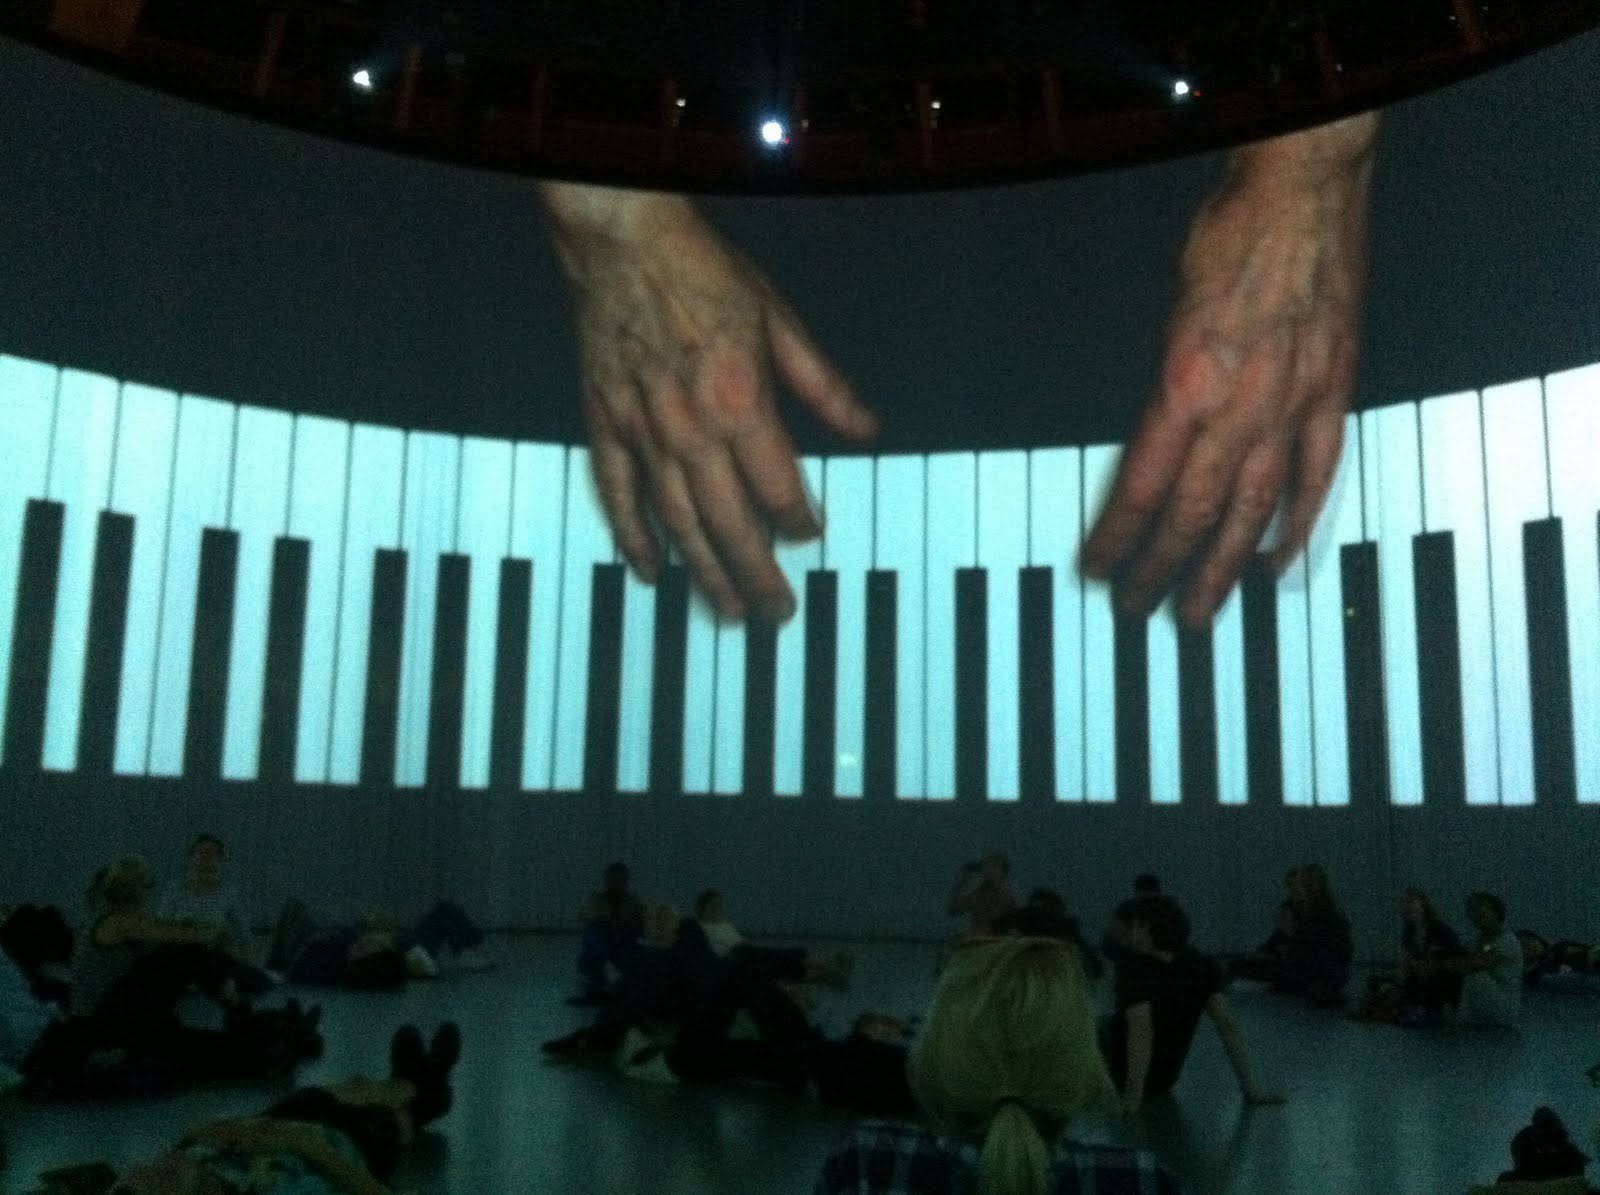 Christian Marclay and Steve Beresford (pianist). Pianorama. 2011. Interactive performance. Roundhouse, London